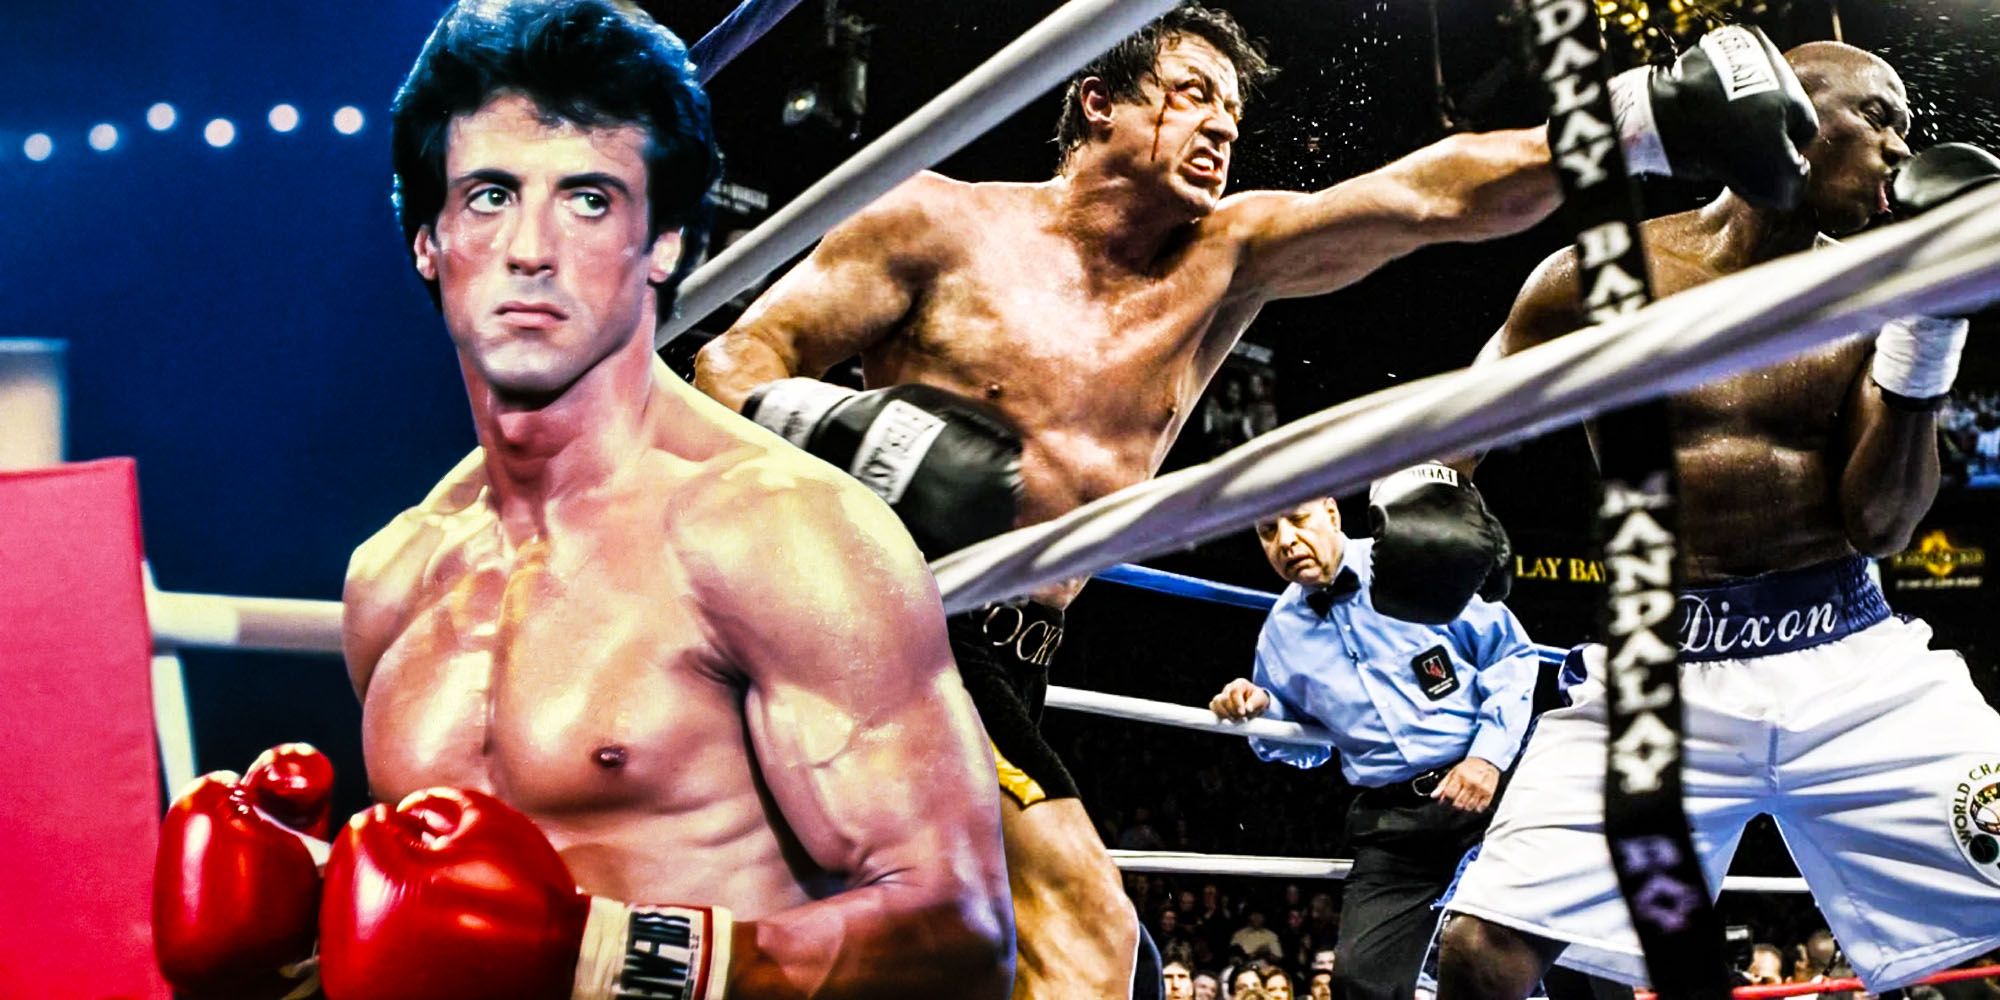 Rocky Balboa is not a good boxer